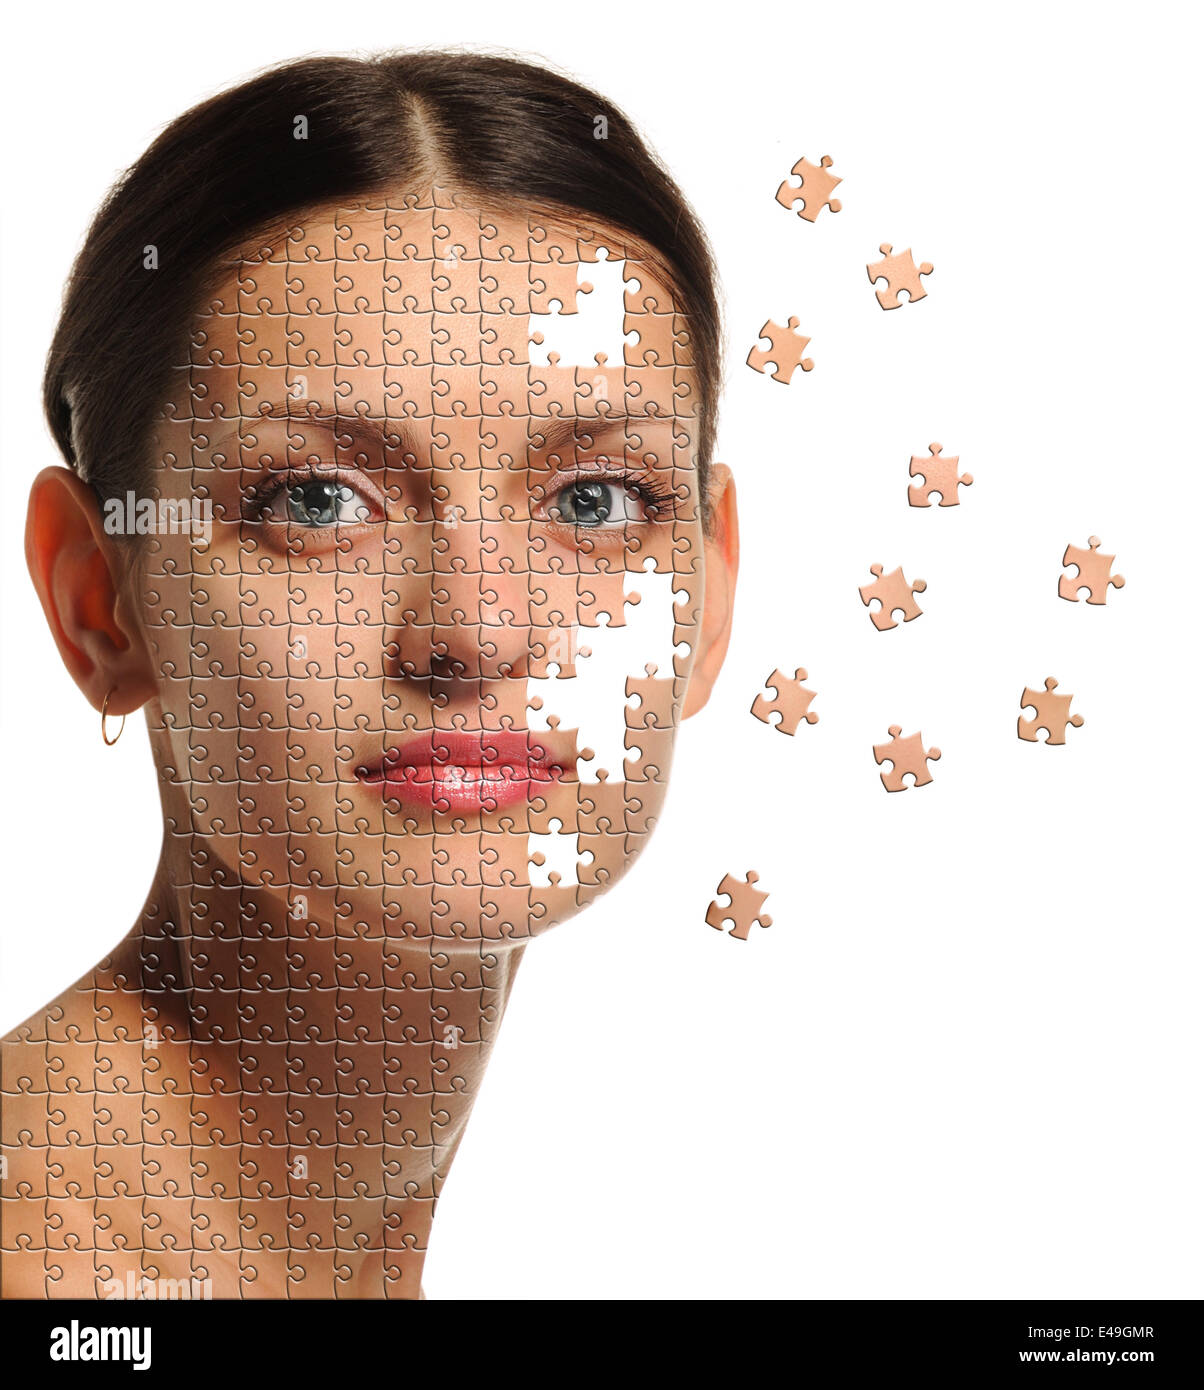 Female face close up and details puzzle Stock Photo - Alamy